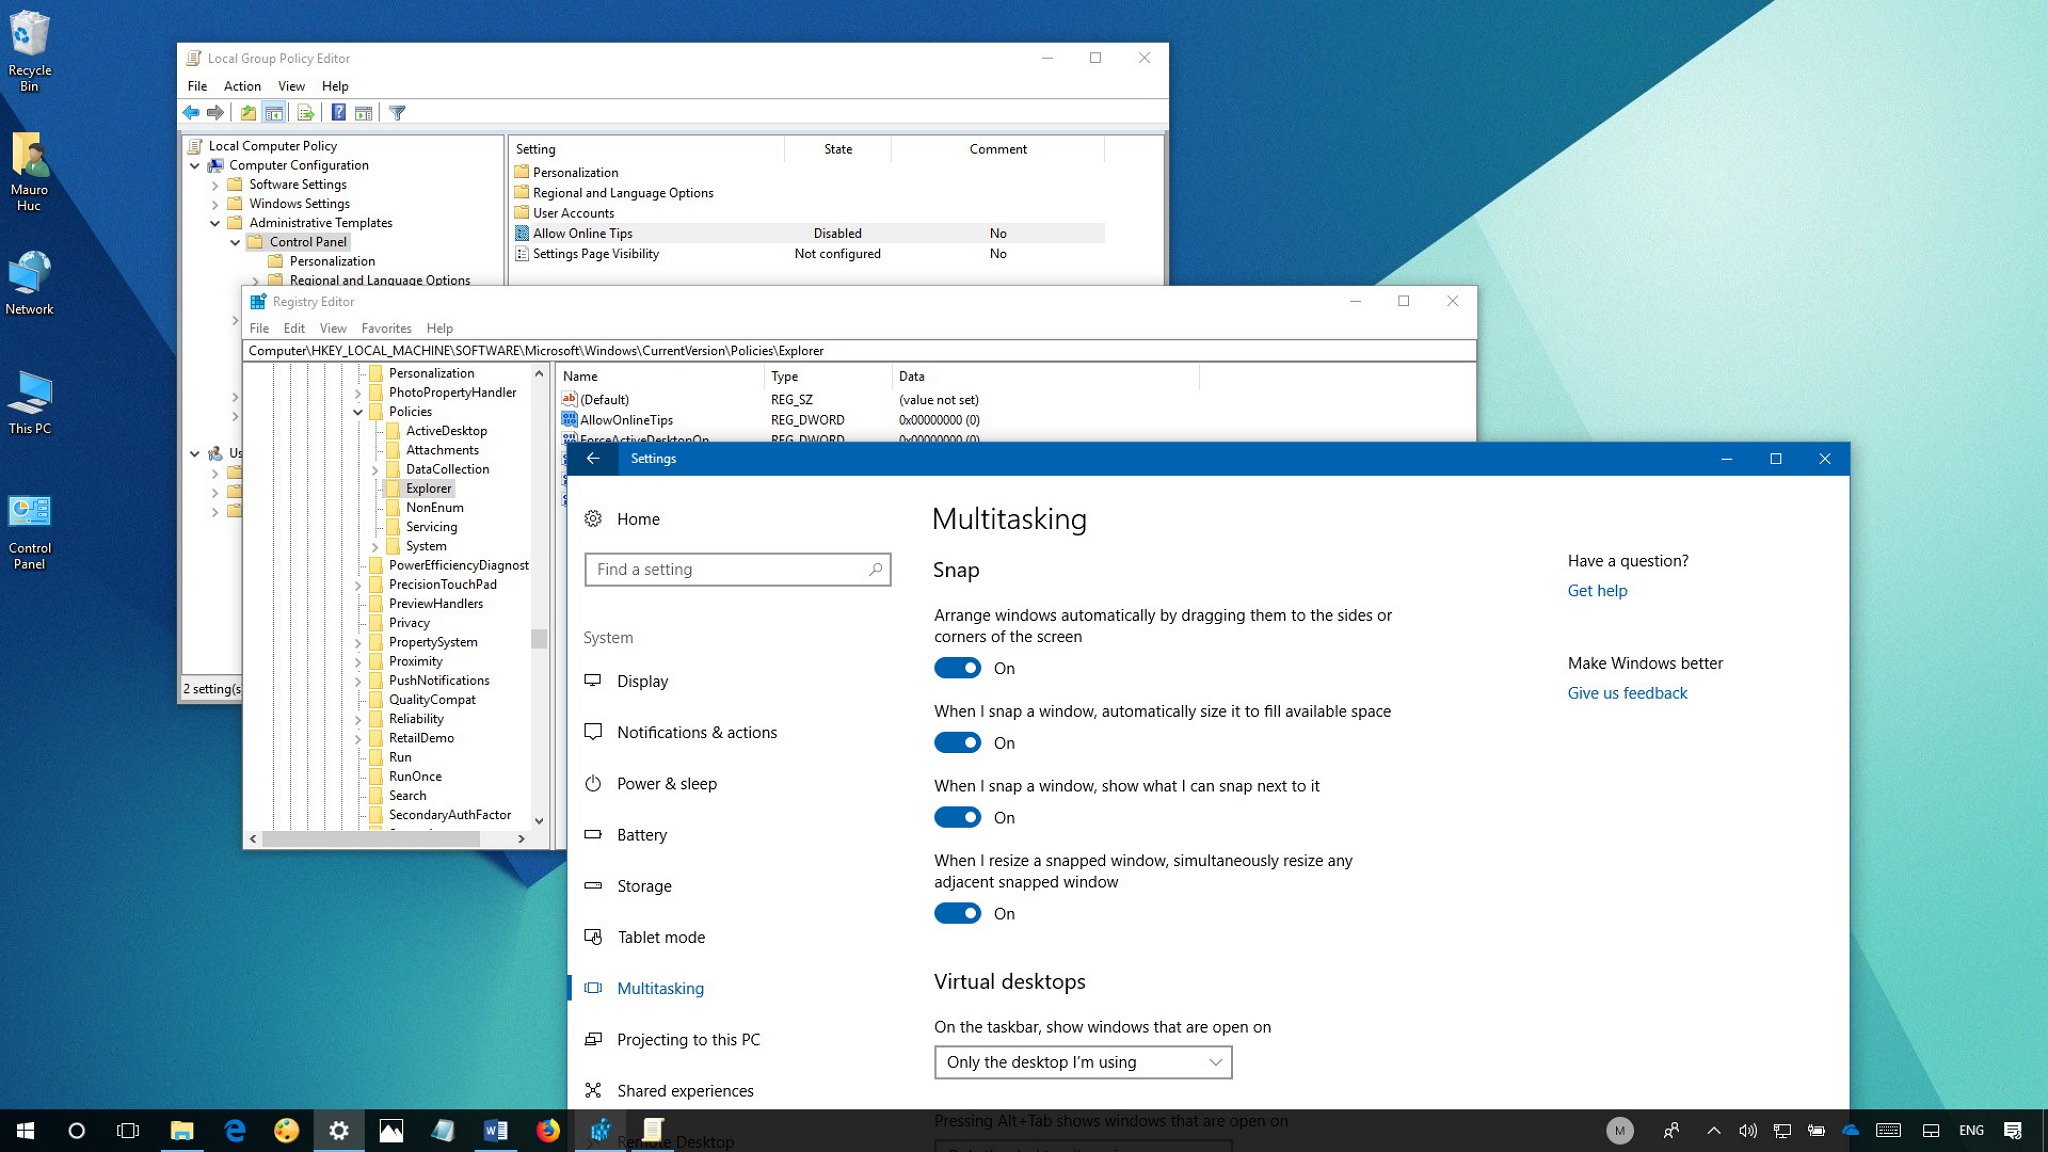 https://www.windowscentral.com/sites/wpcentral.com/files/styles/xlarge/public/field/image/2018/01/remove-tips-settings-windows-10.jpg?itok=f0frHImD